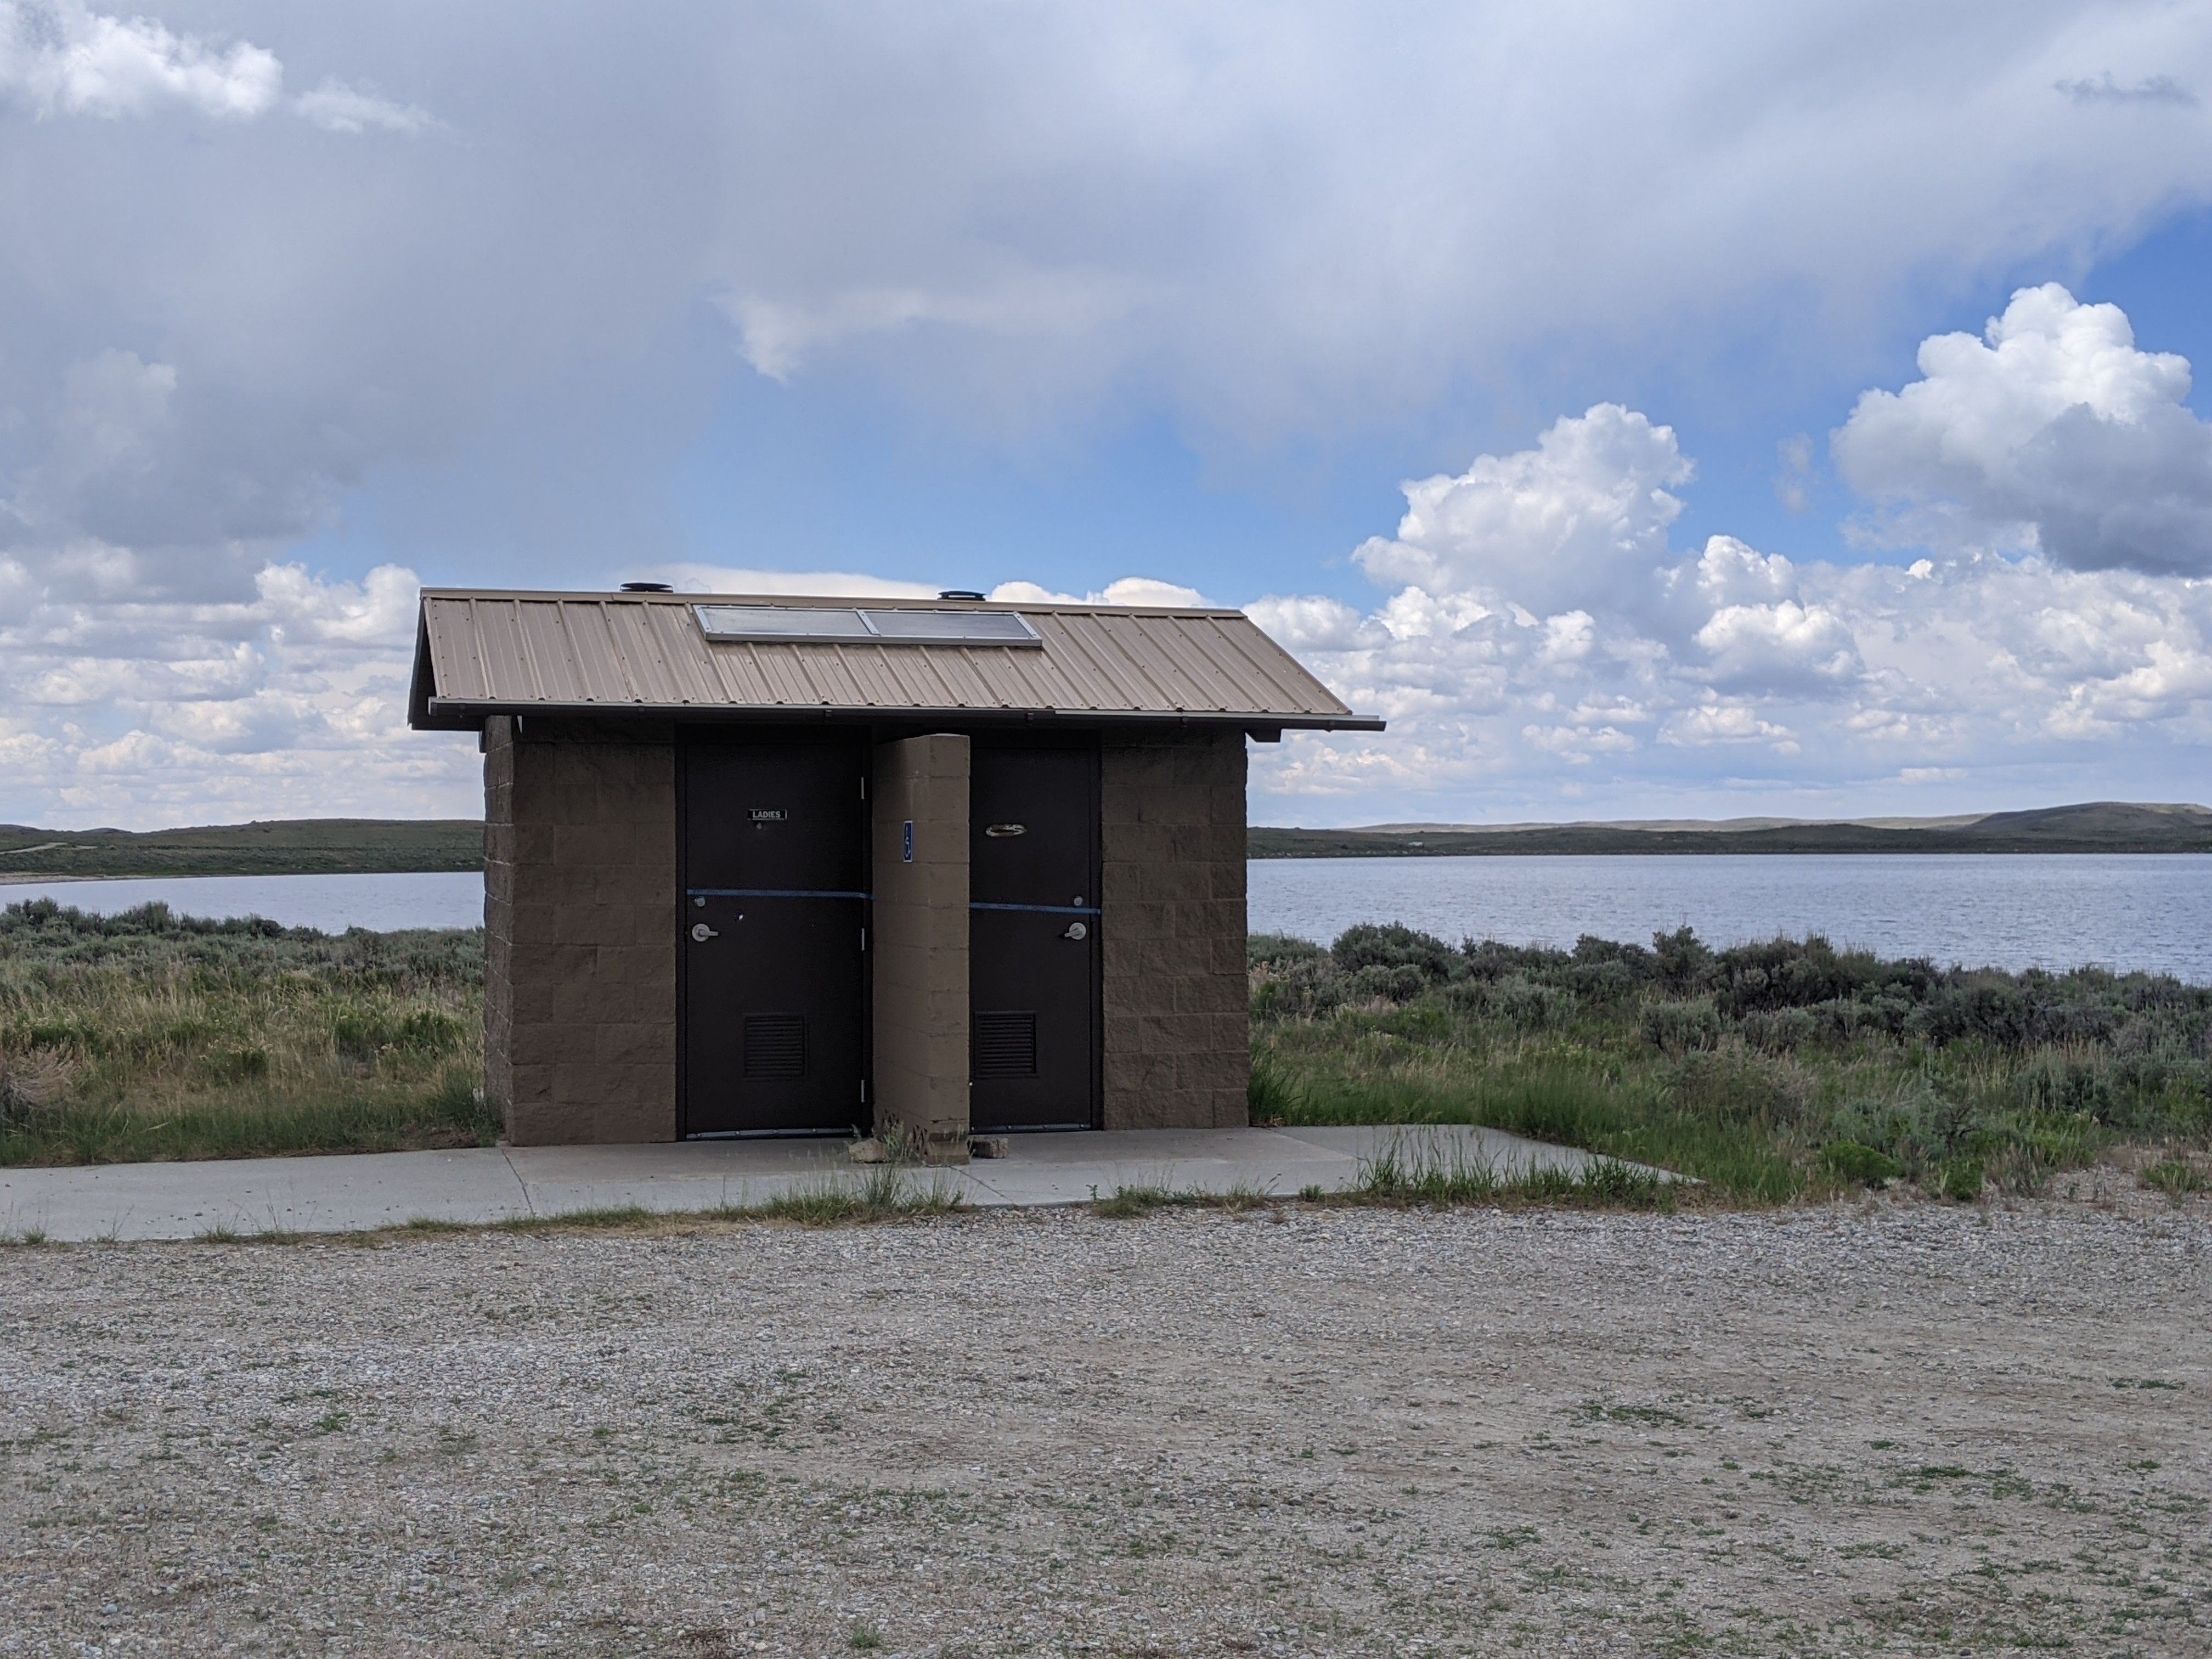 Camper submitted image from Soda Lake WHMA - 4